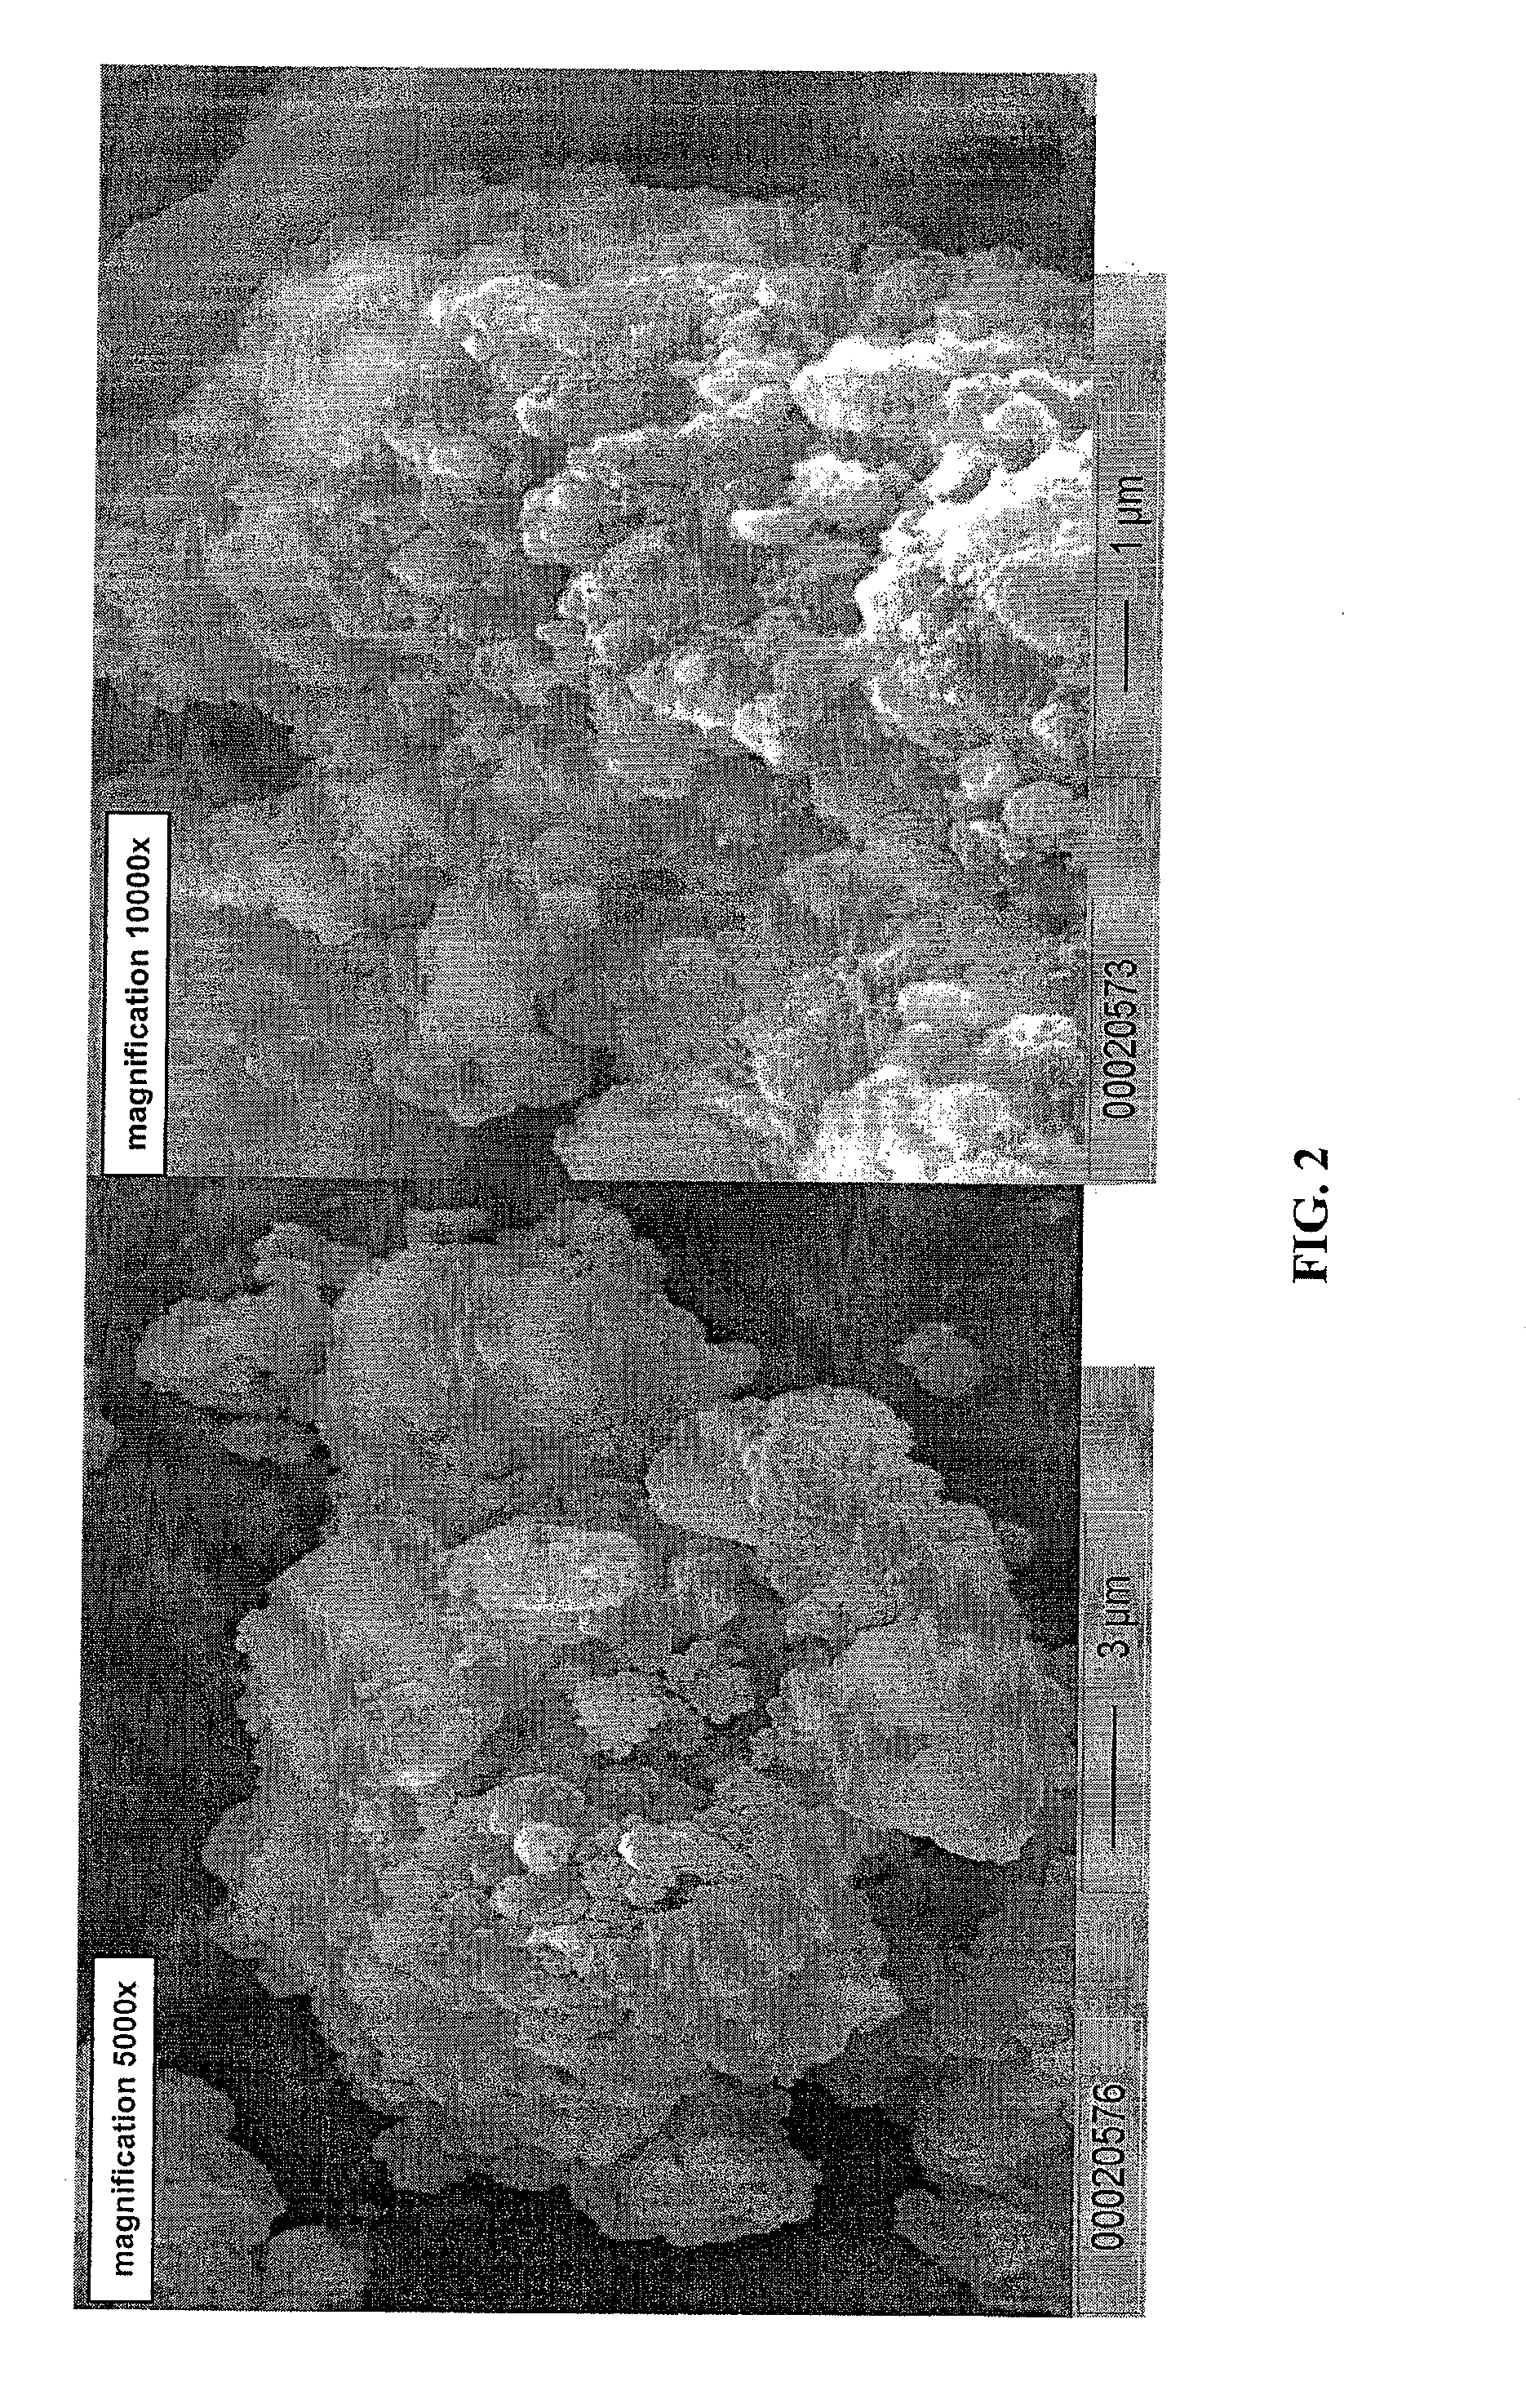 Sapo molecular sieve catalysts and their preparation and uses